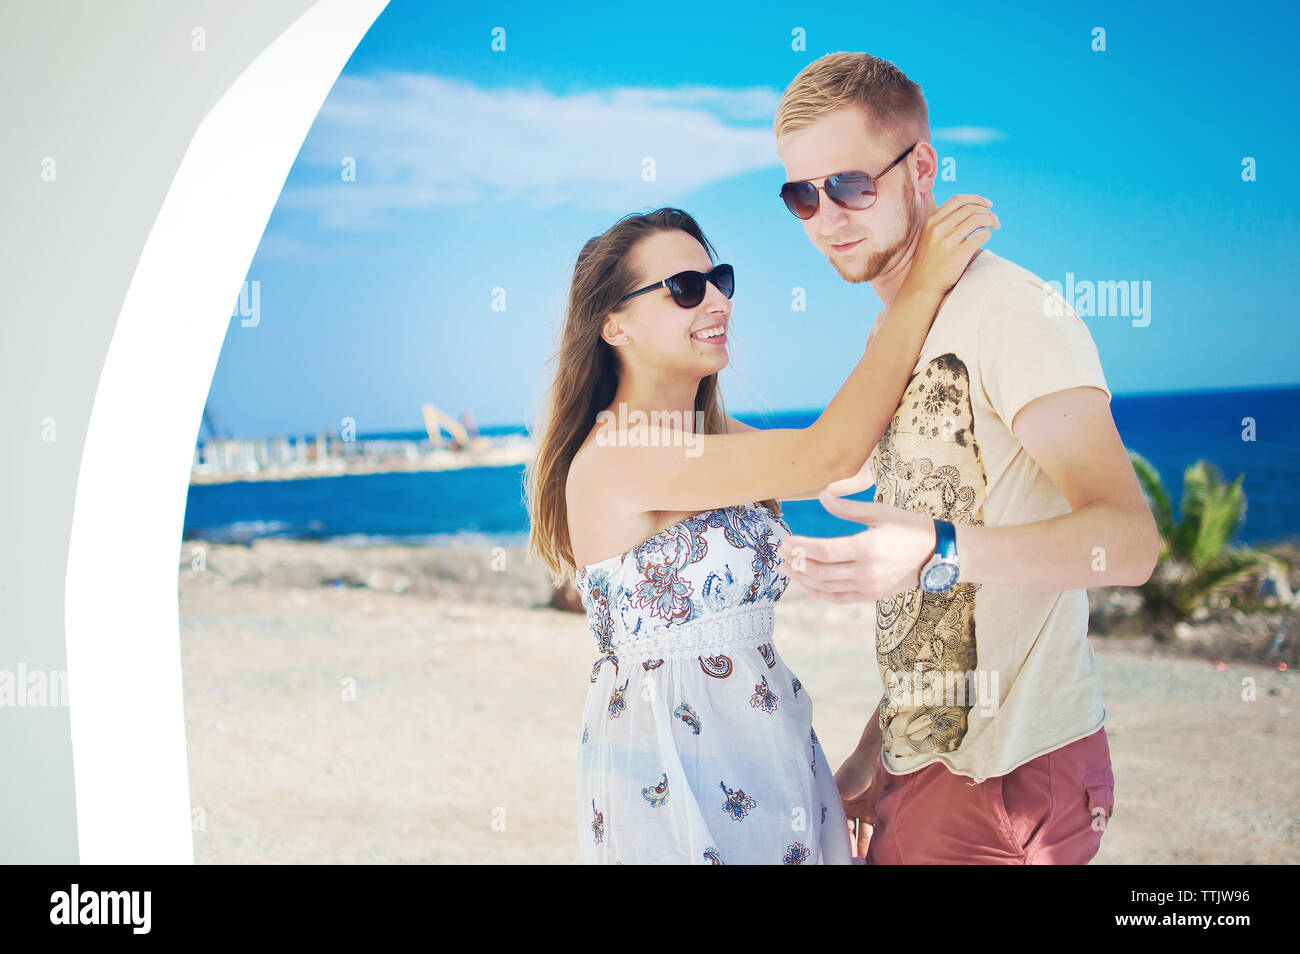 Image of young man in sunglasses holding and hugging caucassian girl in long white dress with brown hair, smiling, looking each other in the eye. Warm Stock Photo